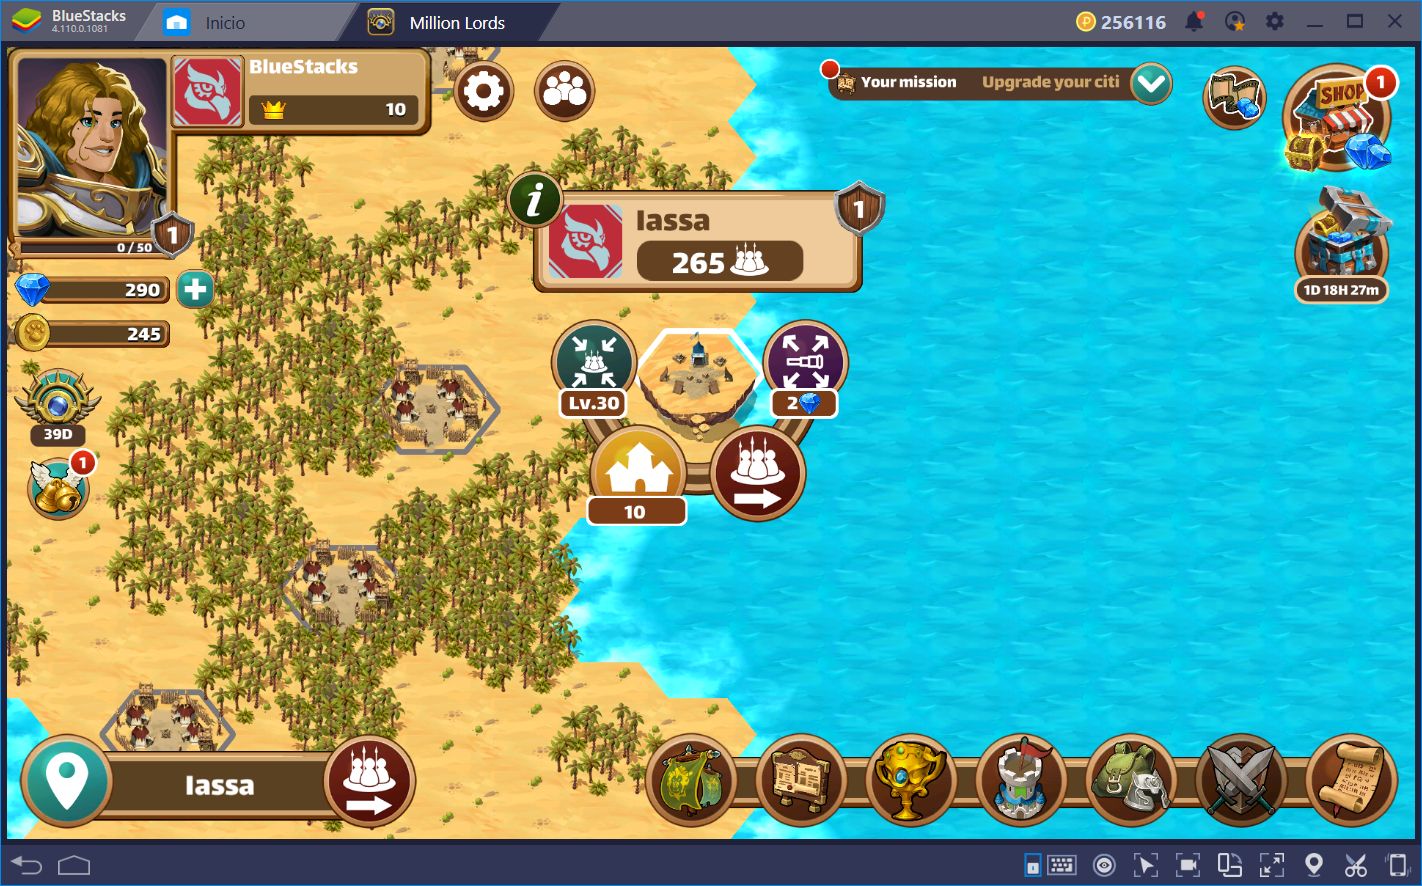 Conquer Your Foes: A Beginner’s Guide to Million Lords on BlueStacks